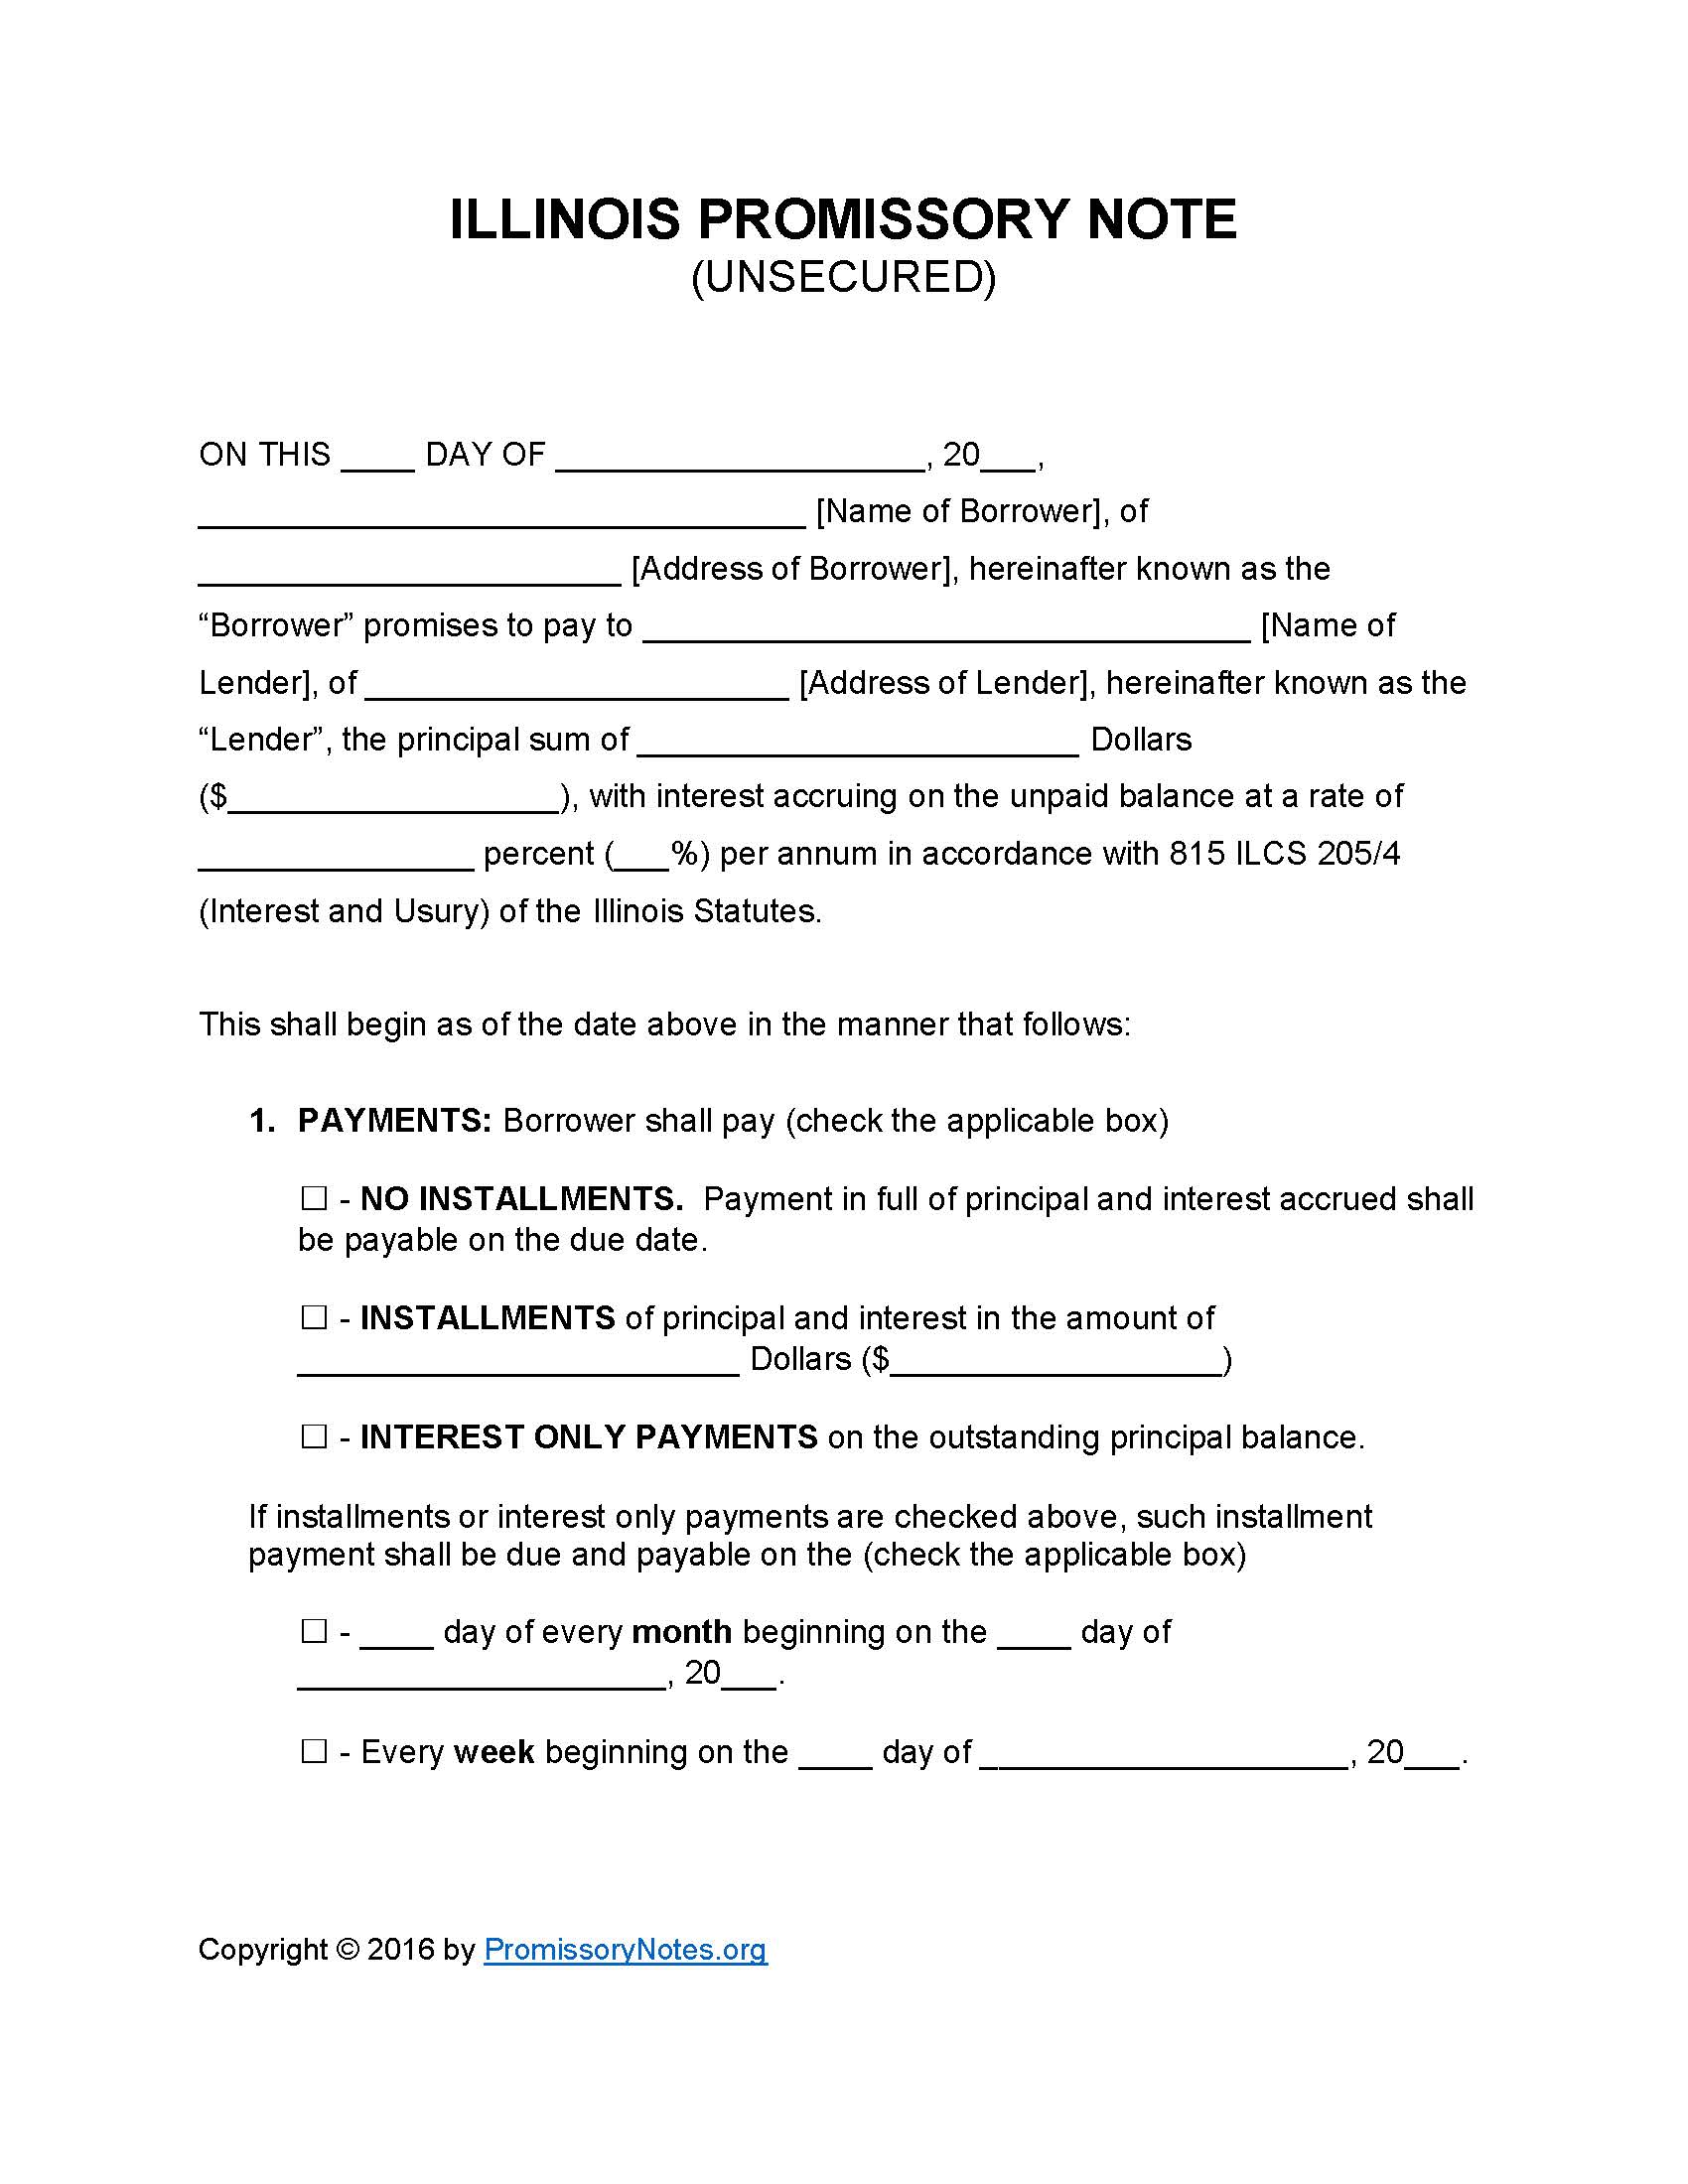 Illinois Unsecured Promissory Note Template Promissory Notes Promissory Notes